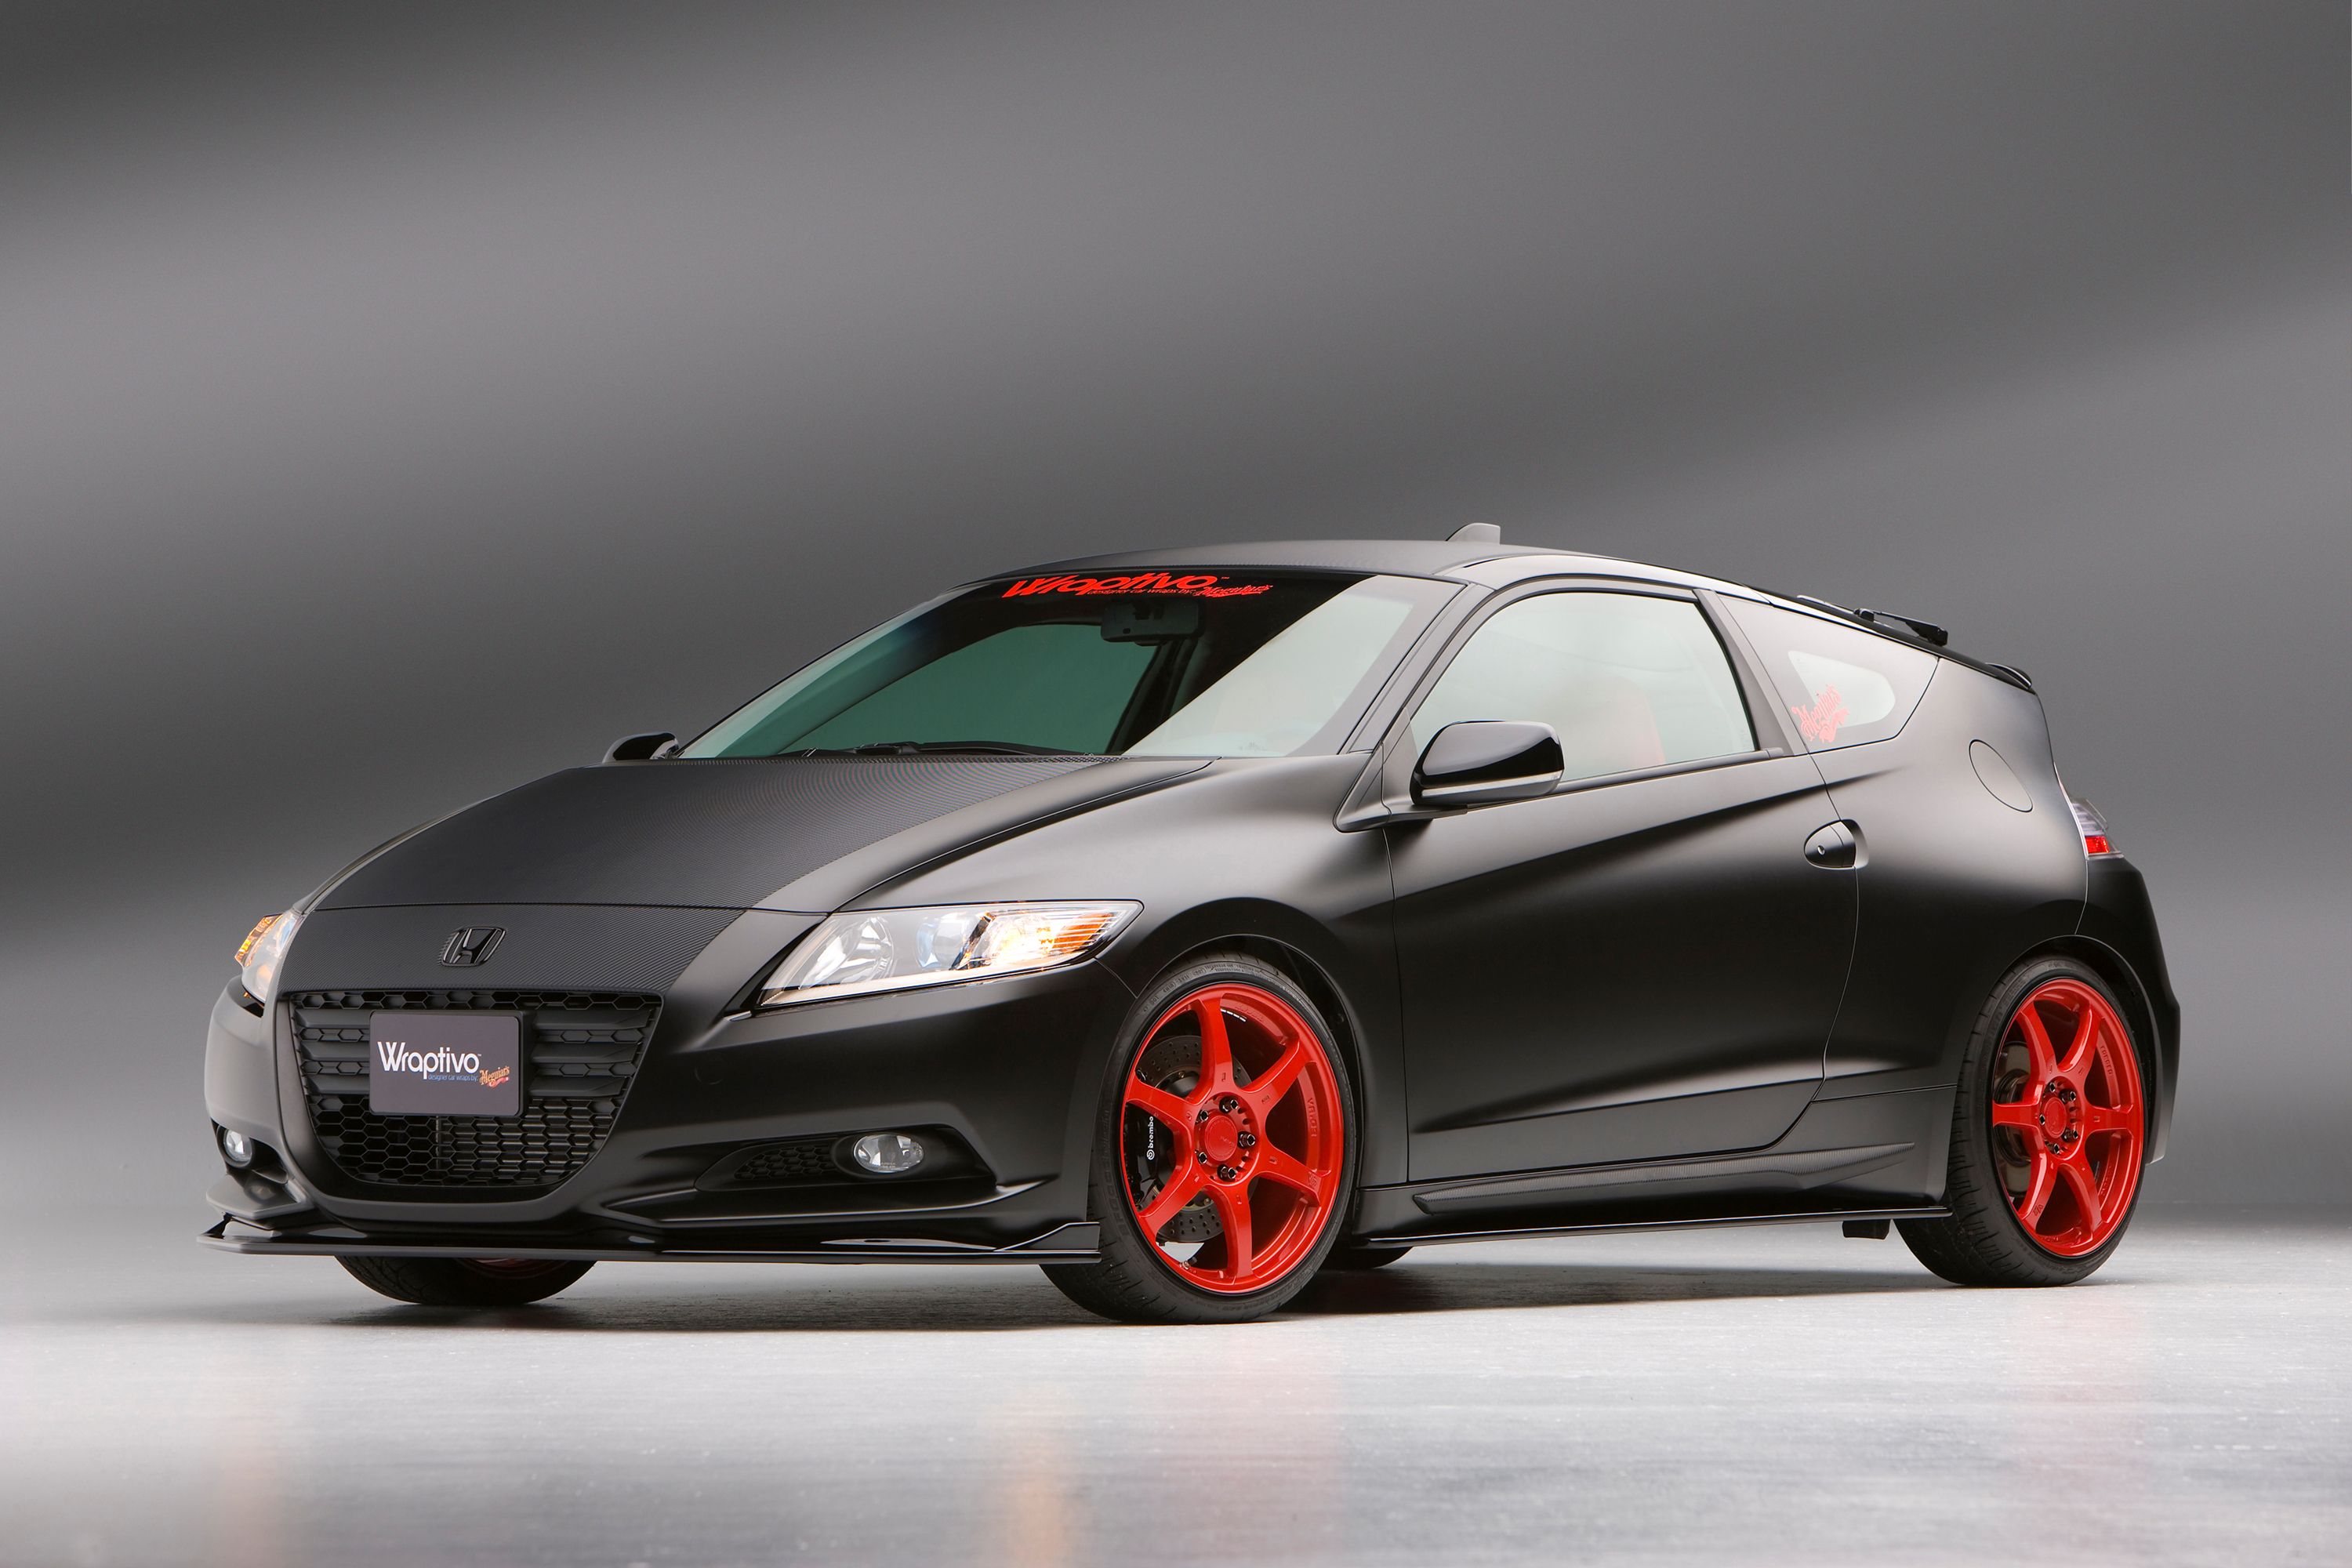 From cute hybrid to hot hatch: Trackside with the HPD supercharged Honda CR- Z - CNET